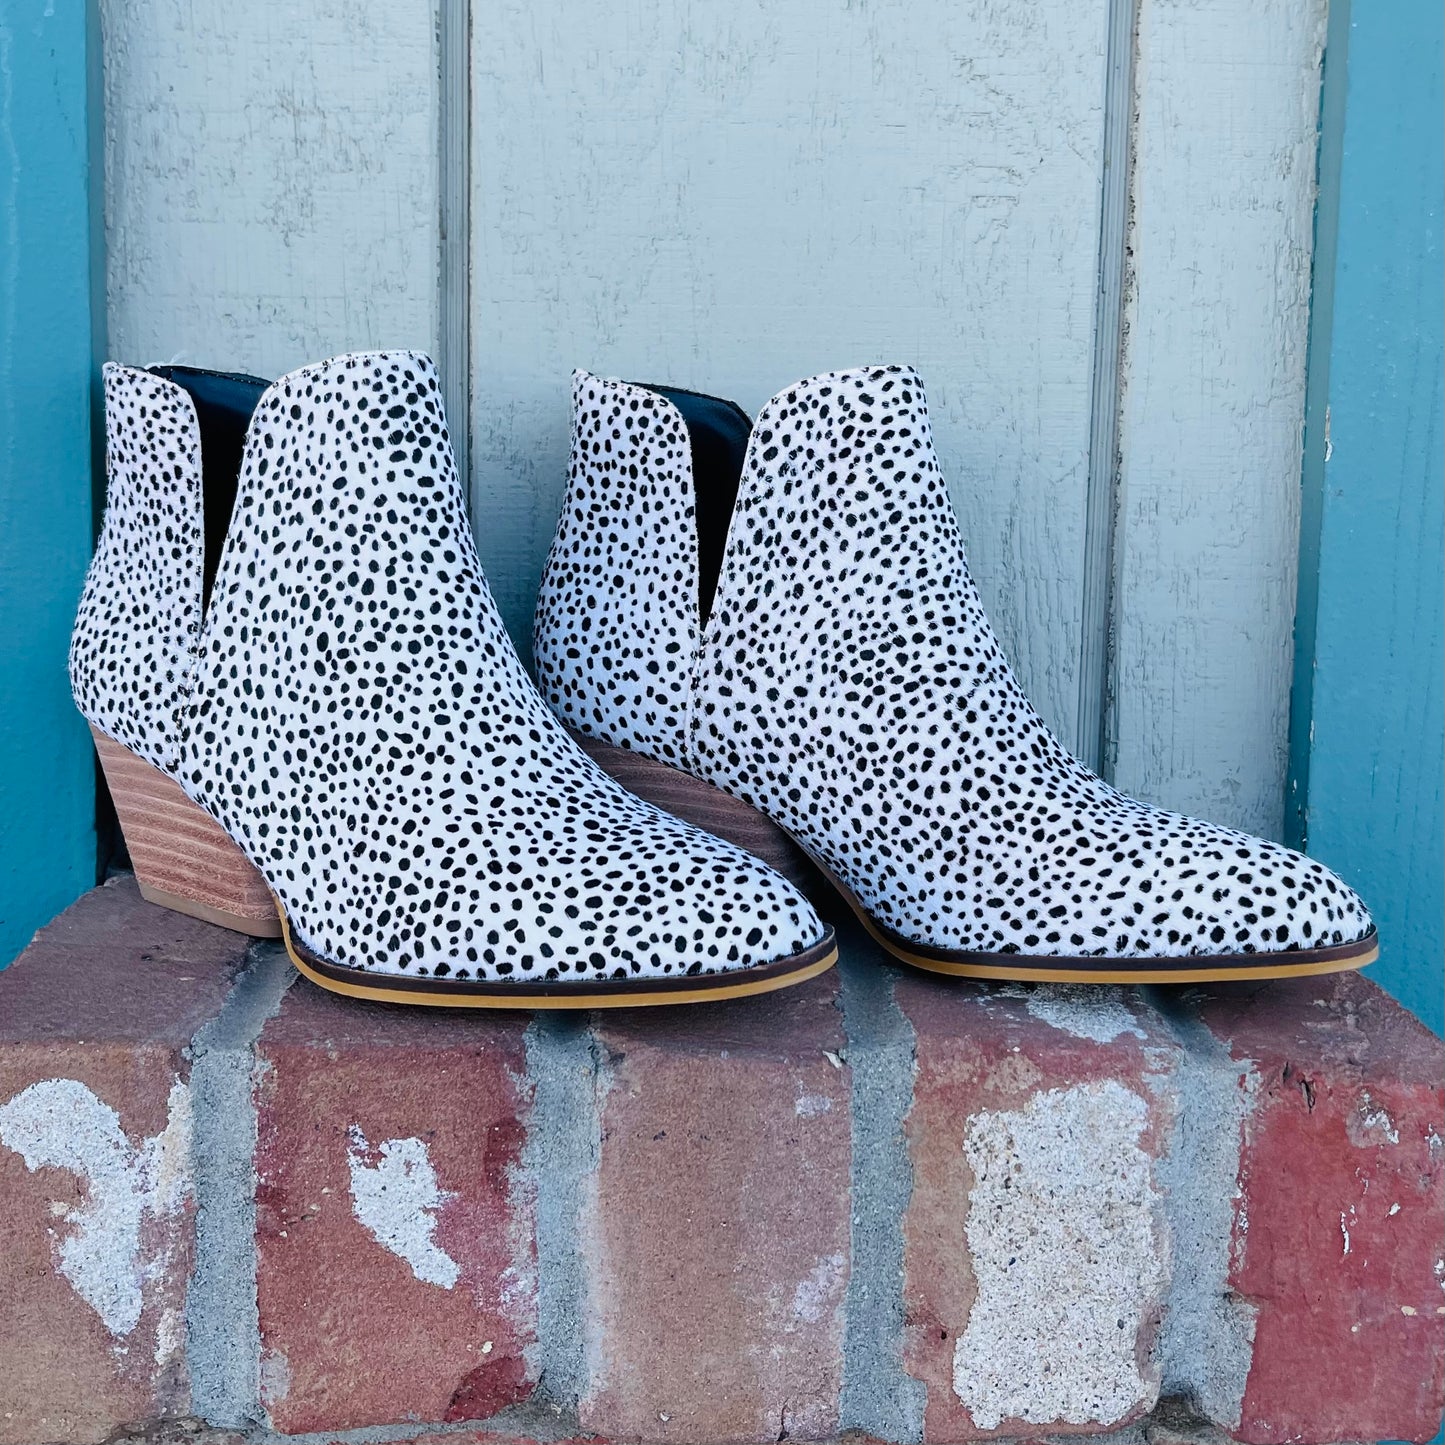 Dotty’s speckled bootie